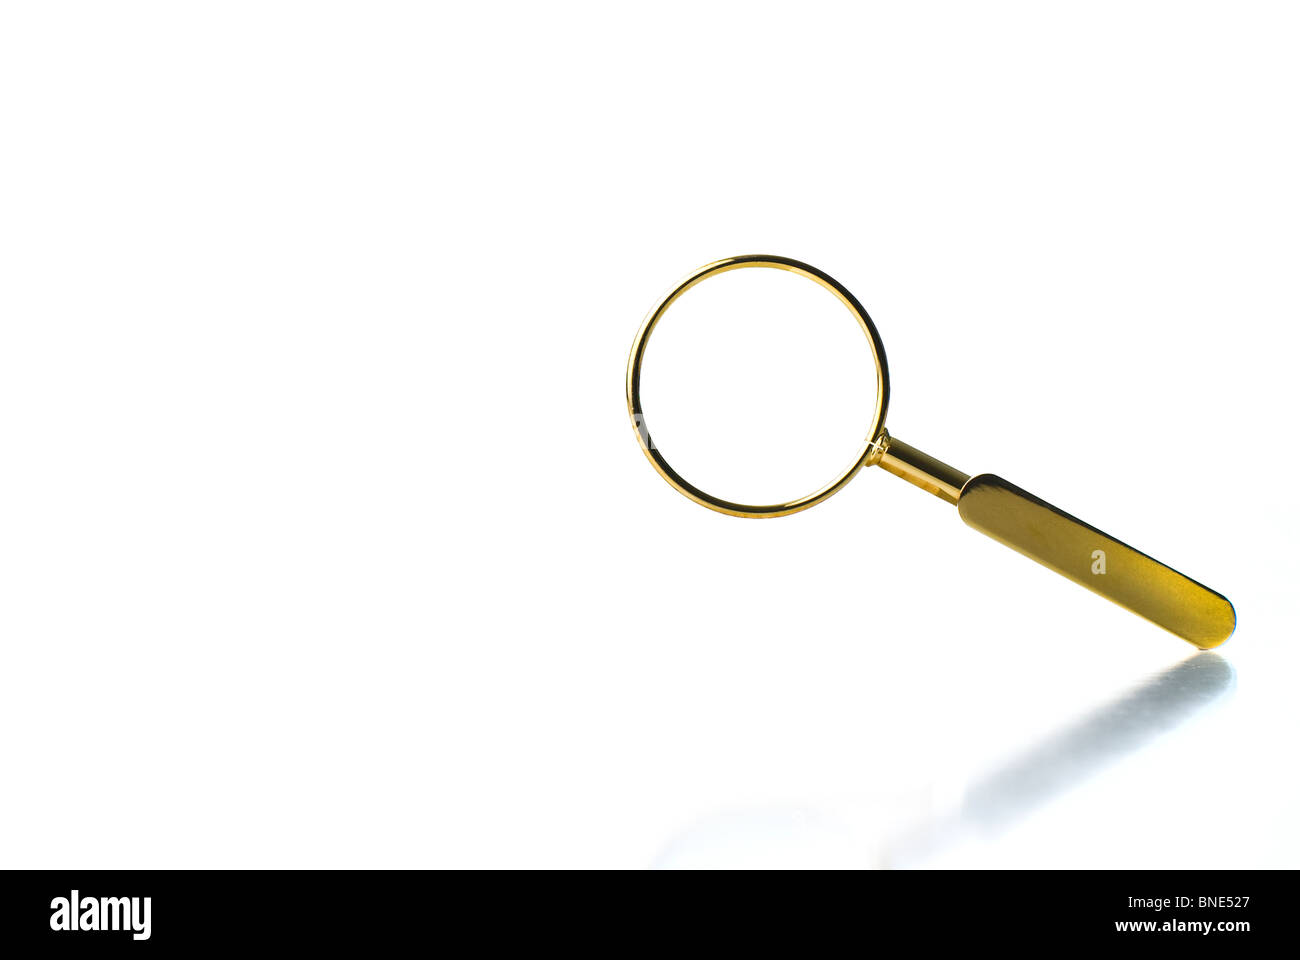 A magnifying glass Stock Photo